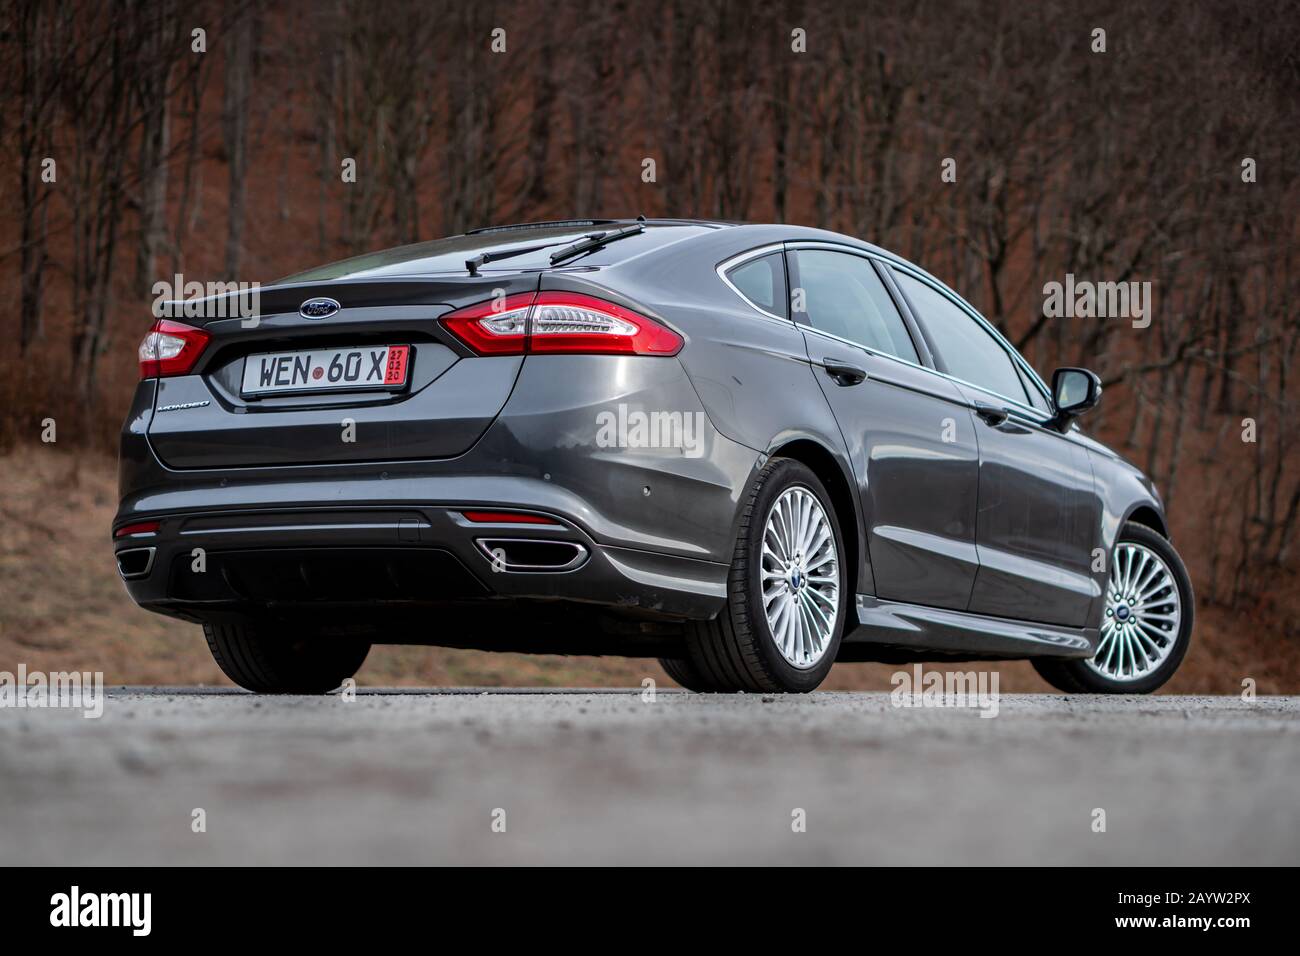 Achtervolging binding de eerste Cluj-Napoca,Cluj/Romania-01.31.2020-Ford Mondeo MK5 Sport edition with  dynamic led headlights, sport front bumper, 18 inch alloy wheels, Aston  Martin Stock Photo - Alamy